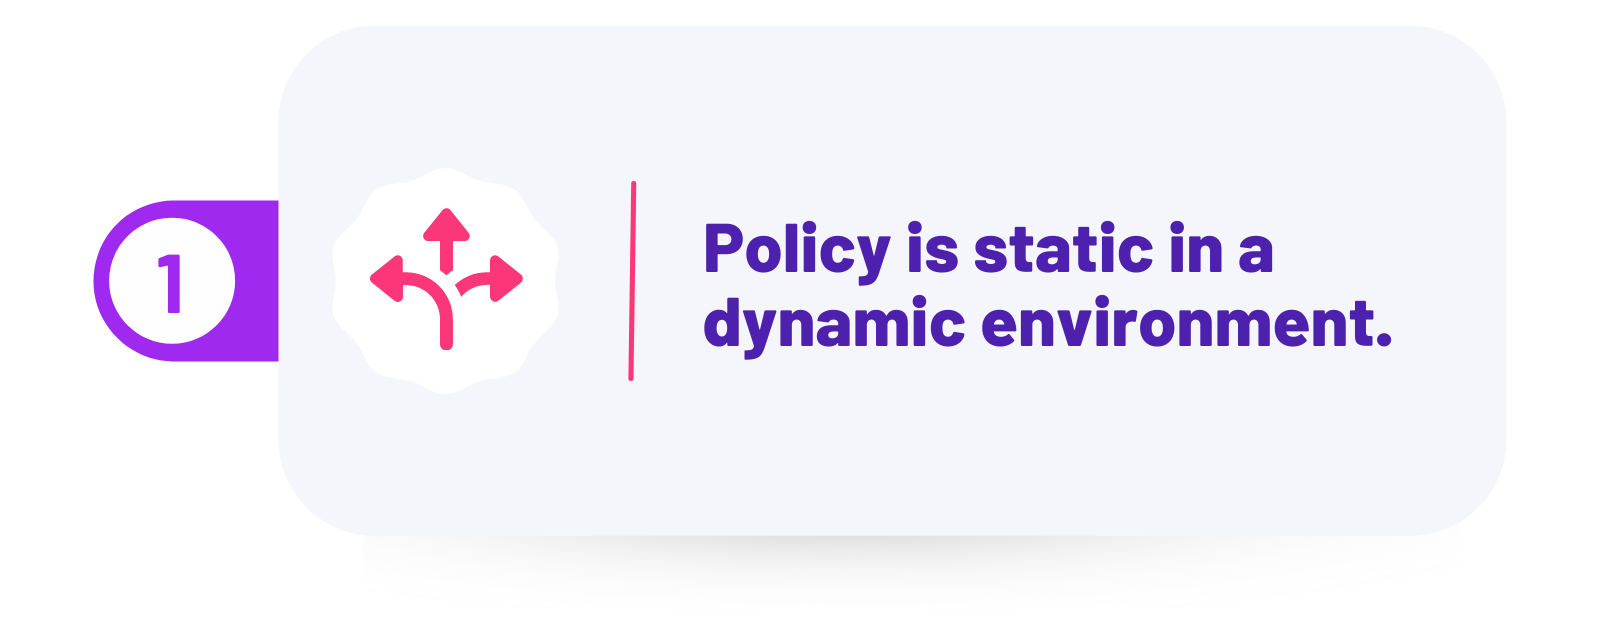 Policy is static in a dynamic environment 